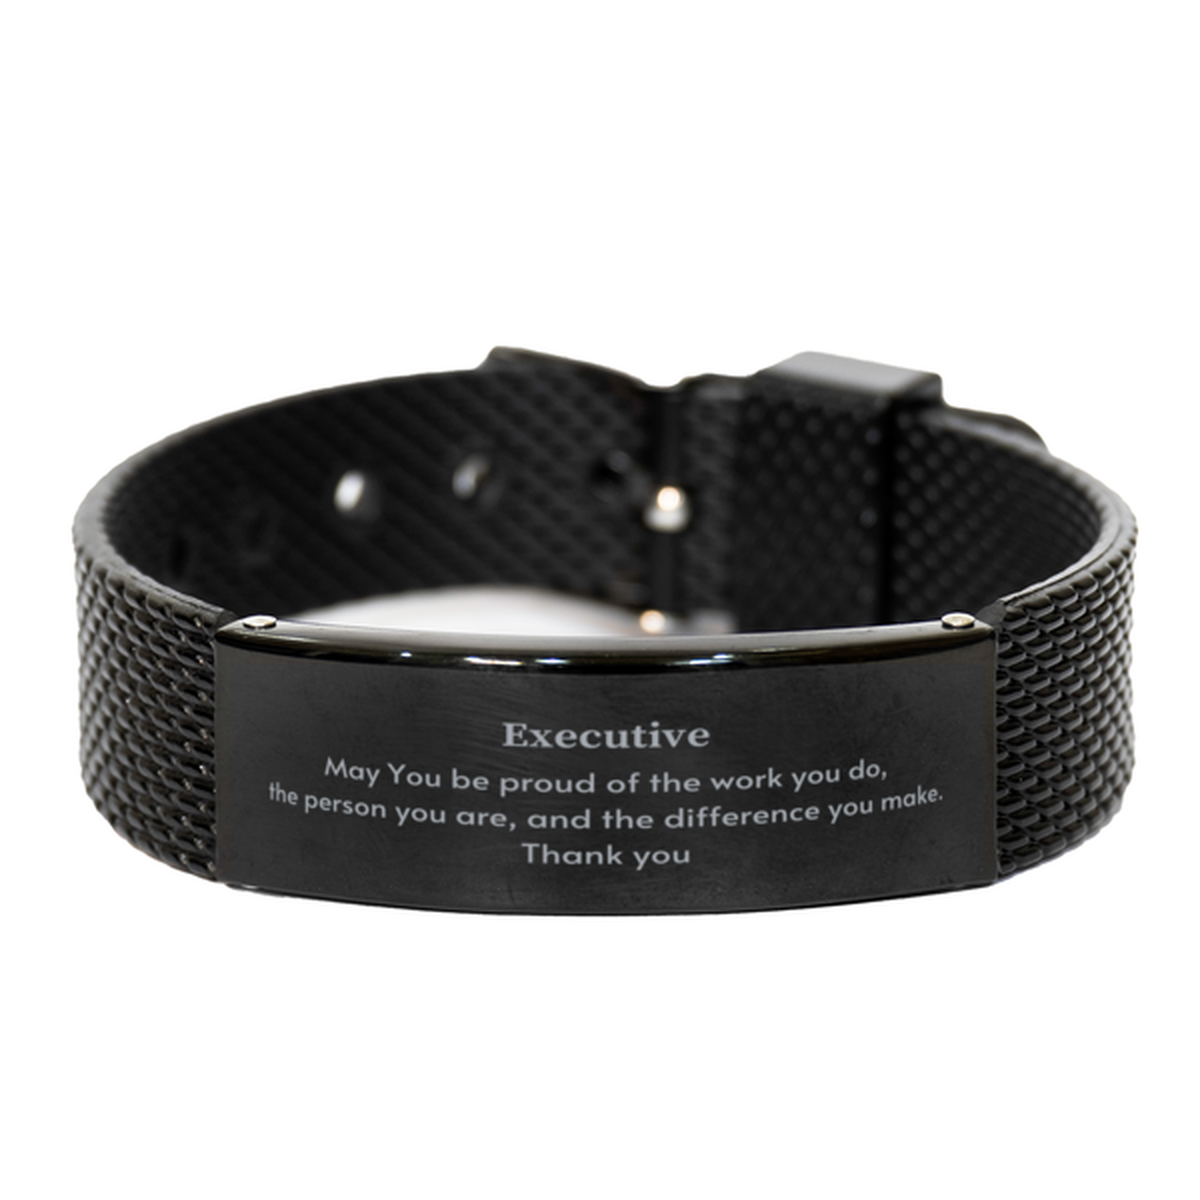 Heartwarming Black Shark Mesh Bracelet Retirement Coworkers Gifts for Executive, Executive May You be proud of the work you do, the person you are Gifts for Boss Men Women Friends